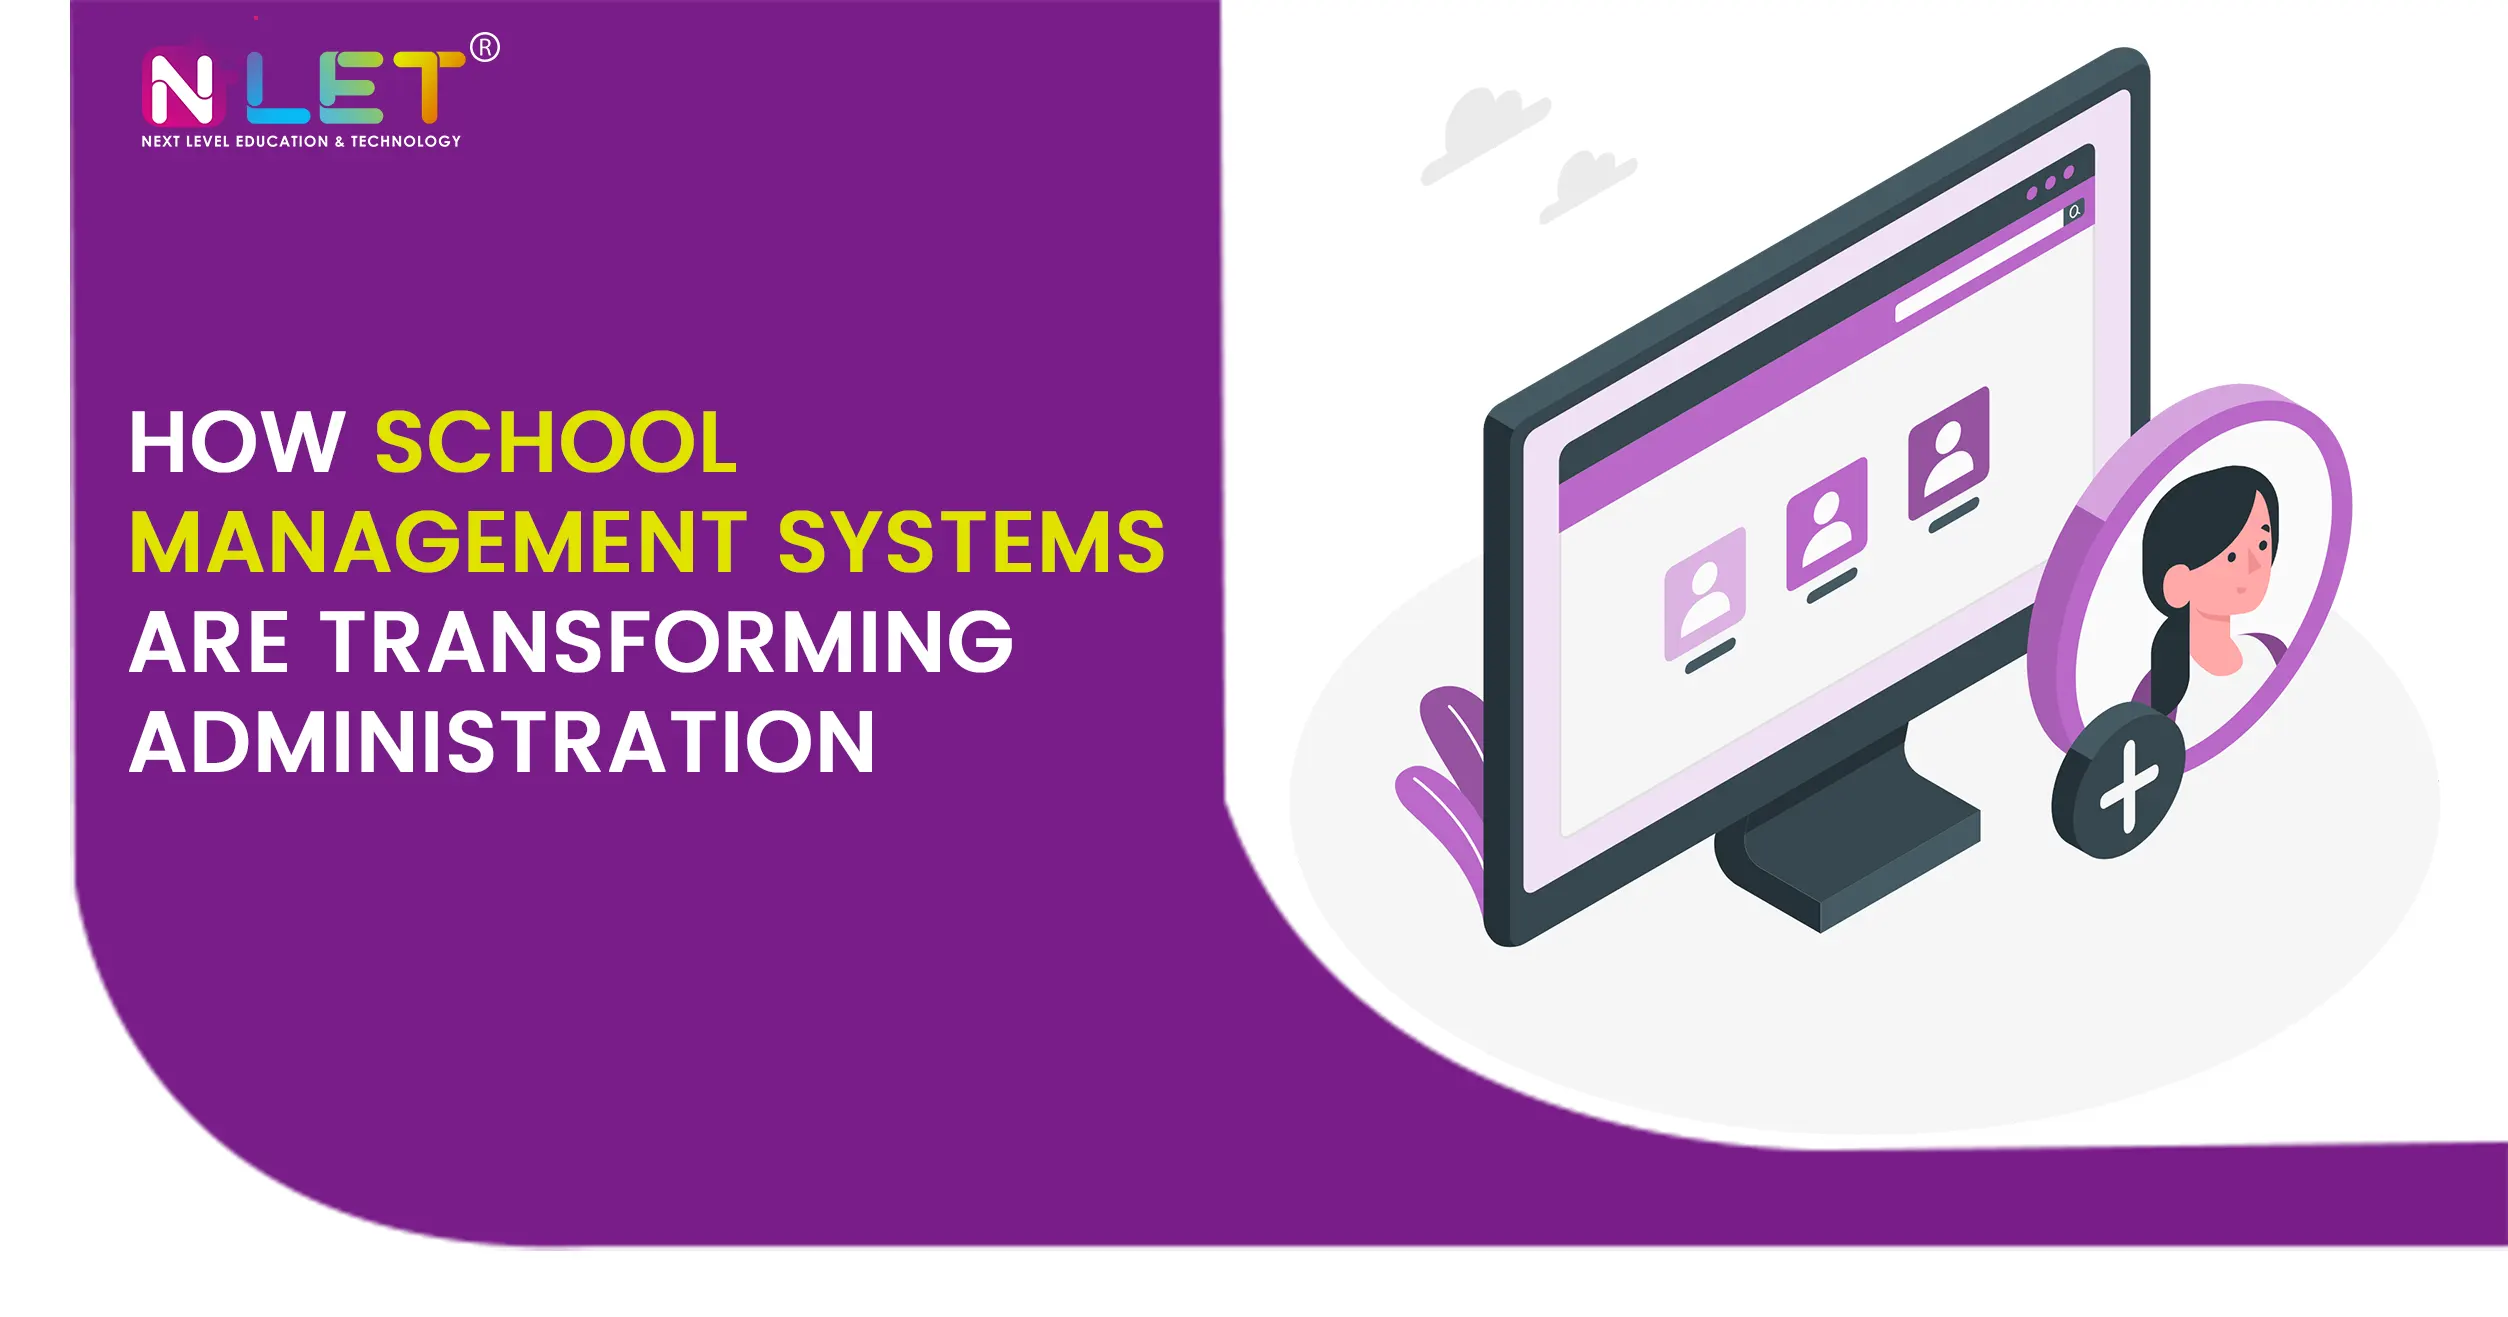 How school management systems are transforming administration?